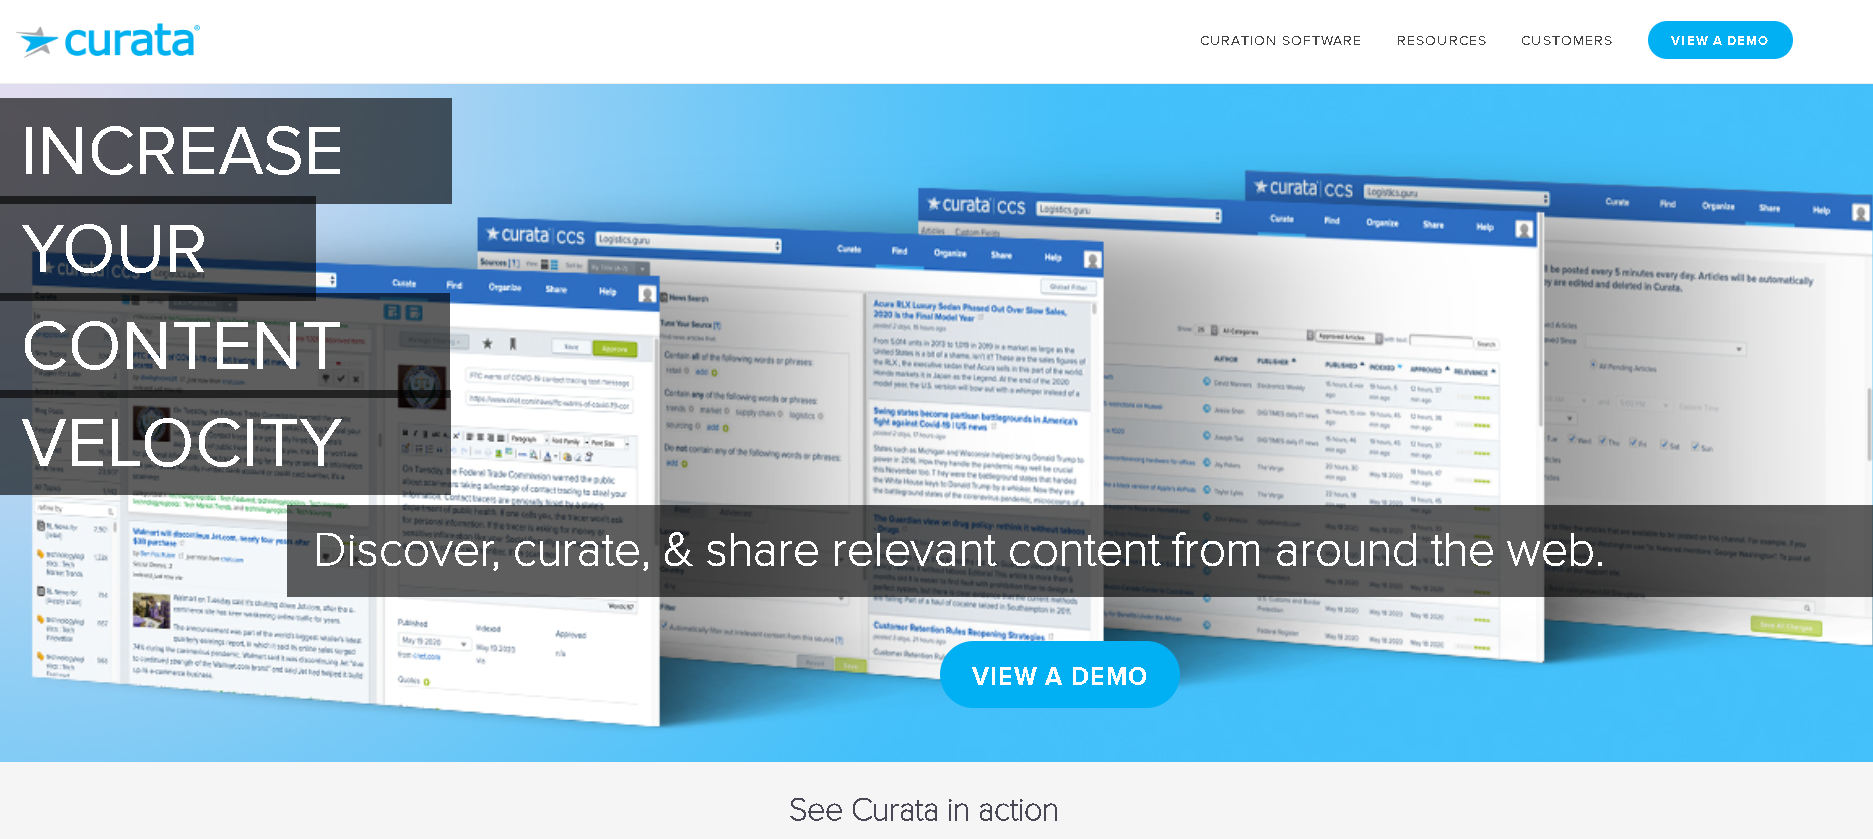 While Curata offers a robust free plan, its more advanced features come with paid subscriptions.